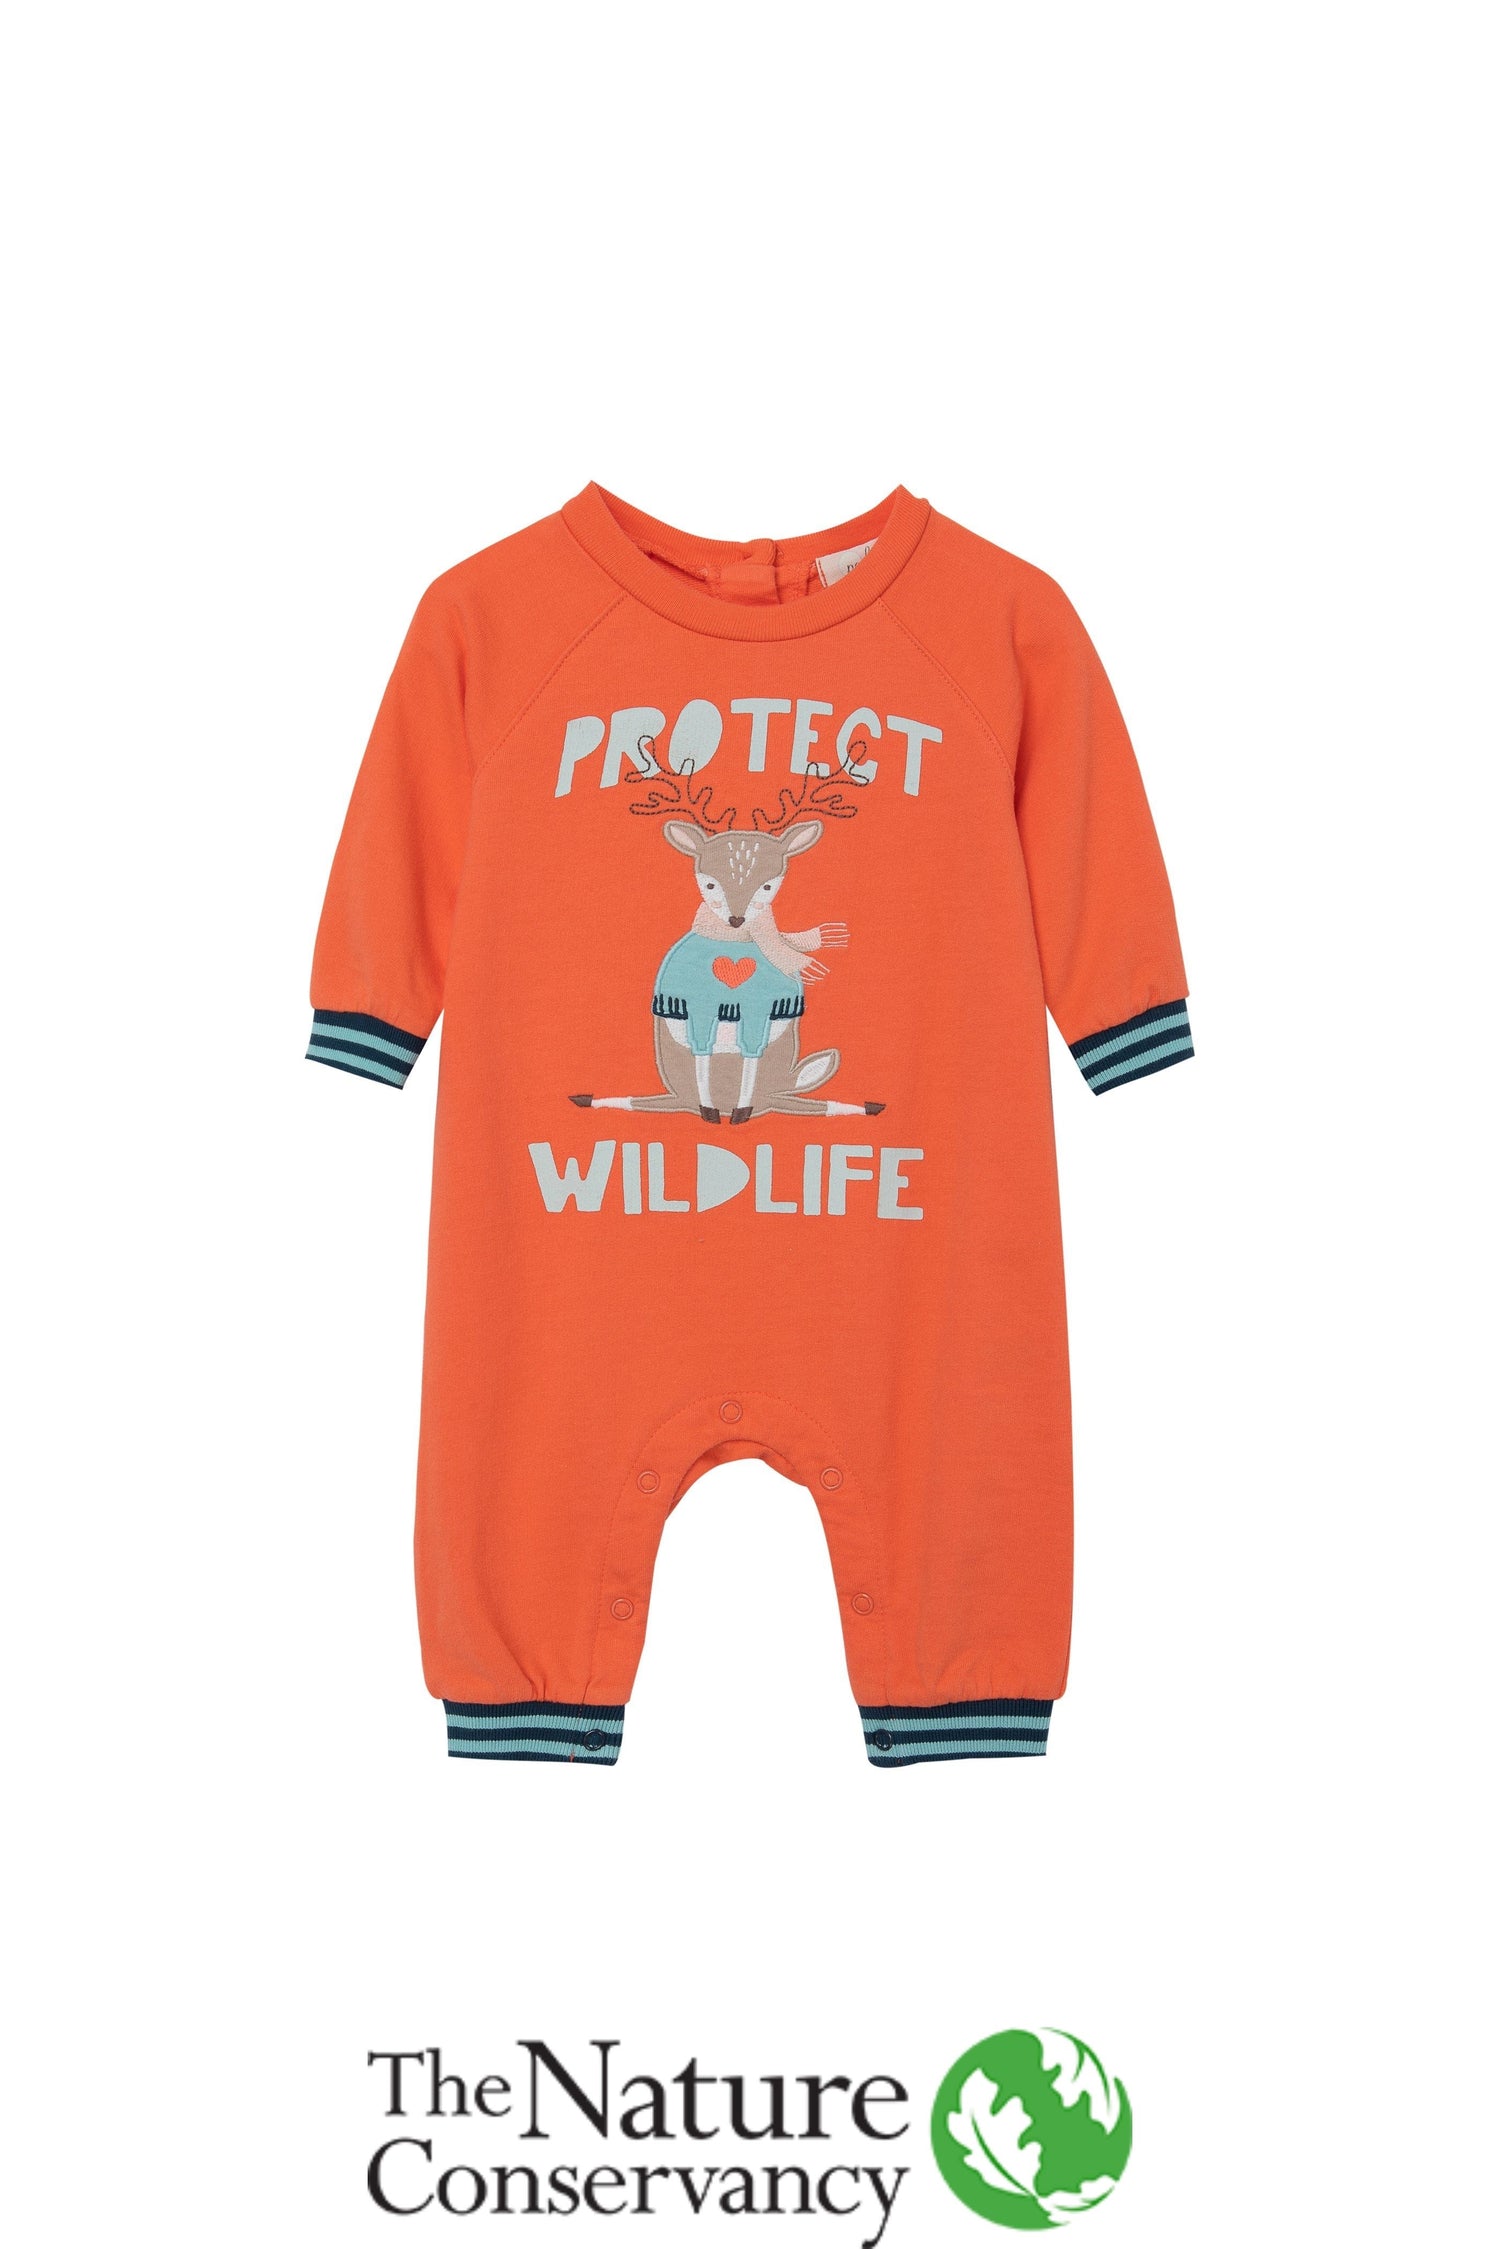 Front view of orange baby jumpsuit with reindeer and "protect wildlife" written